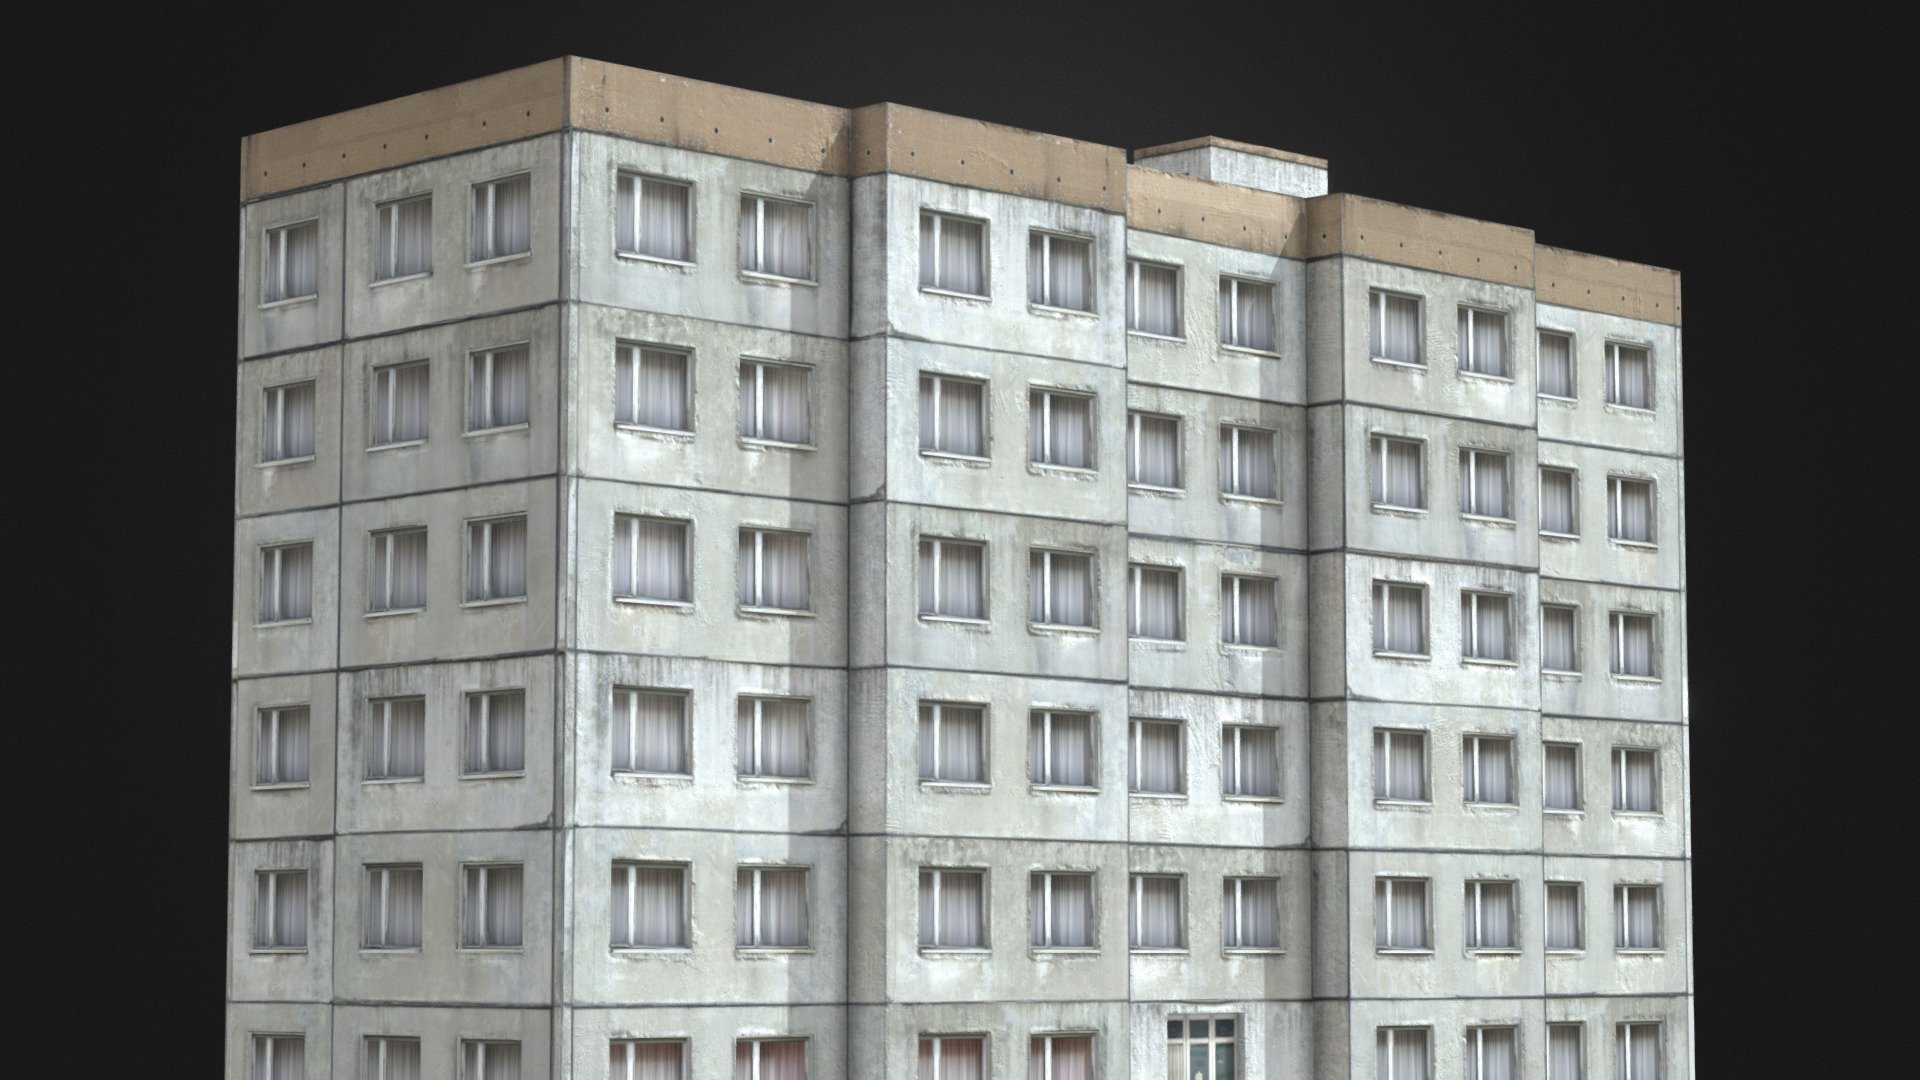 A low poly soviet / asian apartment building. Intended for use in games or renders! High quality 8k textures. Tried to get as photoreal as possible 
with the constraints of it being low poly.

Model created in Maya, textured in Substance Painter, using textures from www.textures.com - LOW POLY - SOVIET  APARTMENT BUILDING 8K - Download Free 3D model by Colin.Greenall 3d model